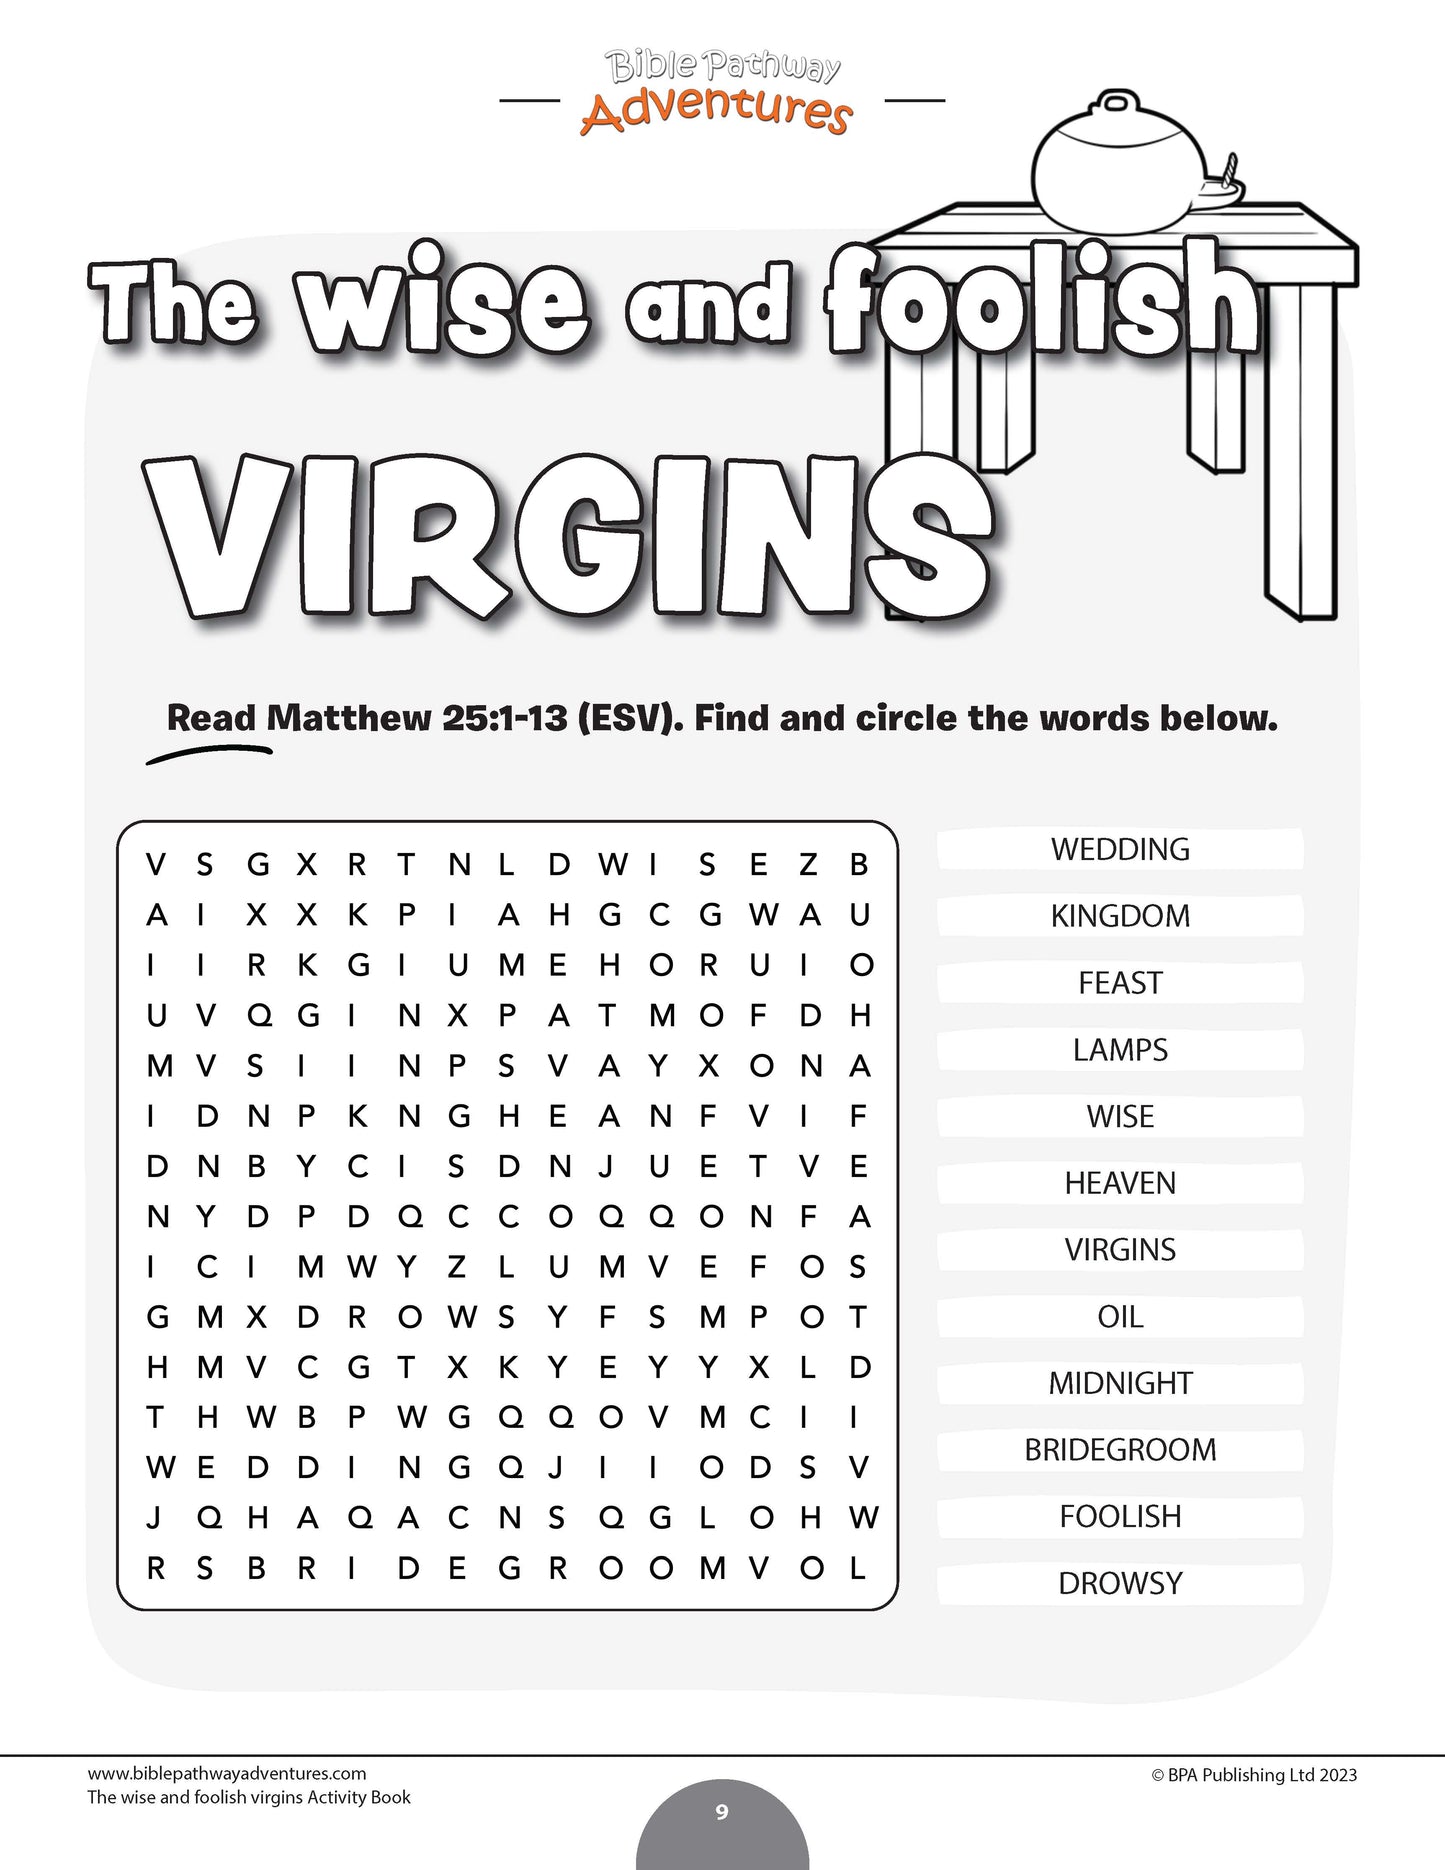 Parable of the Wise and Foolish Virgins Activity Book